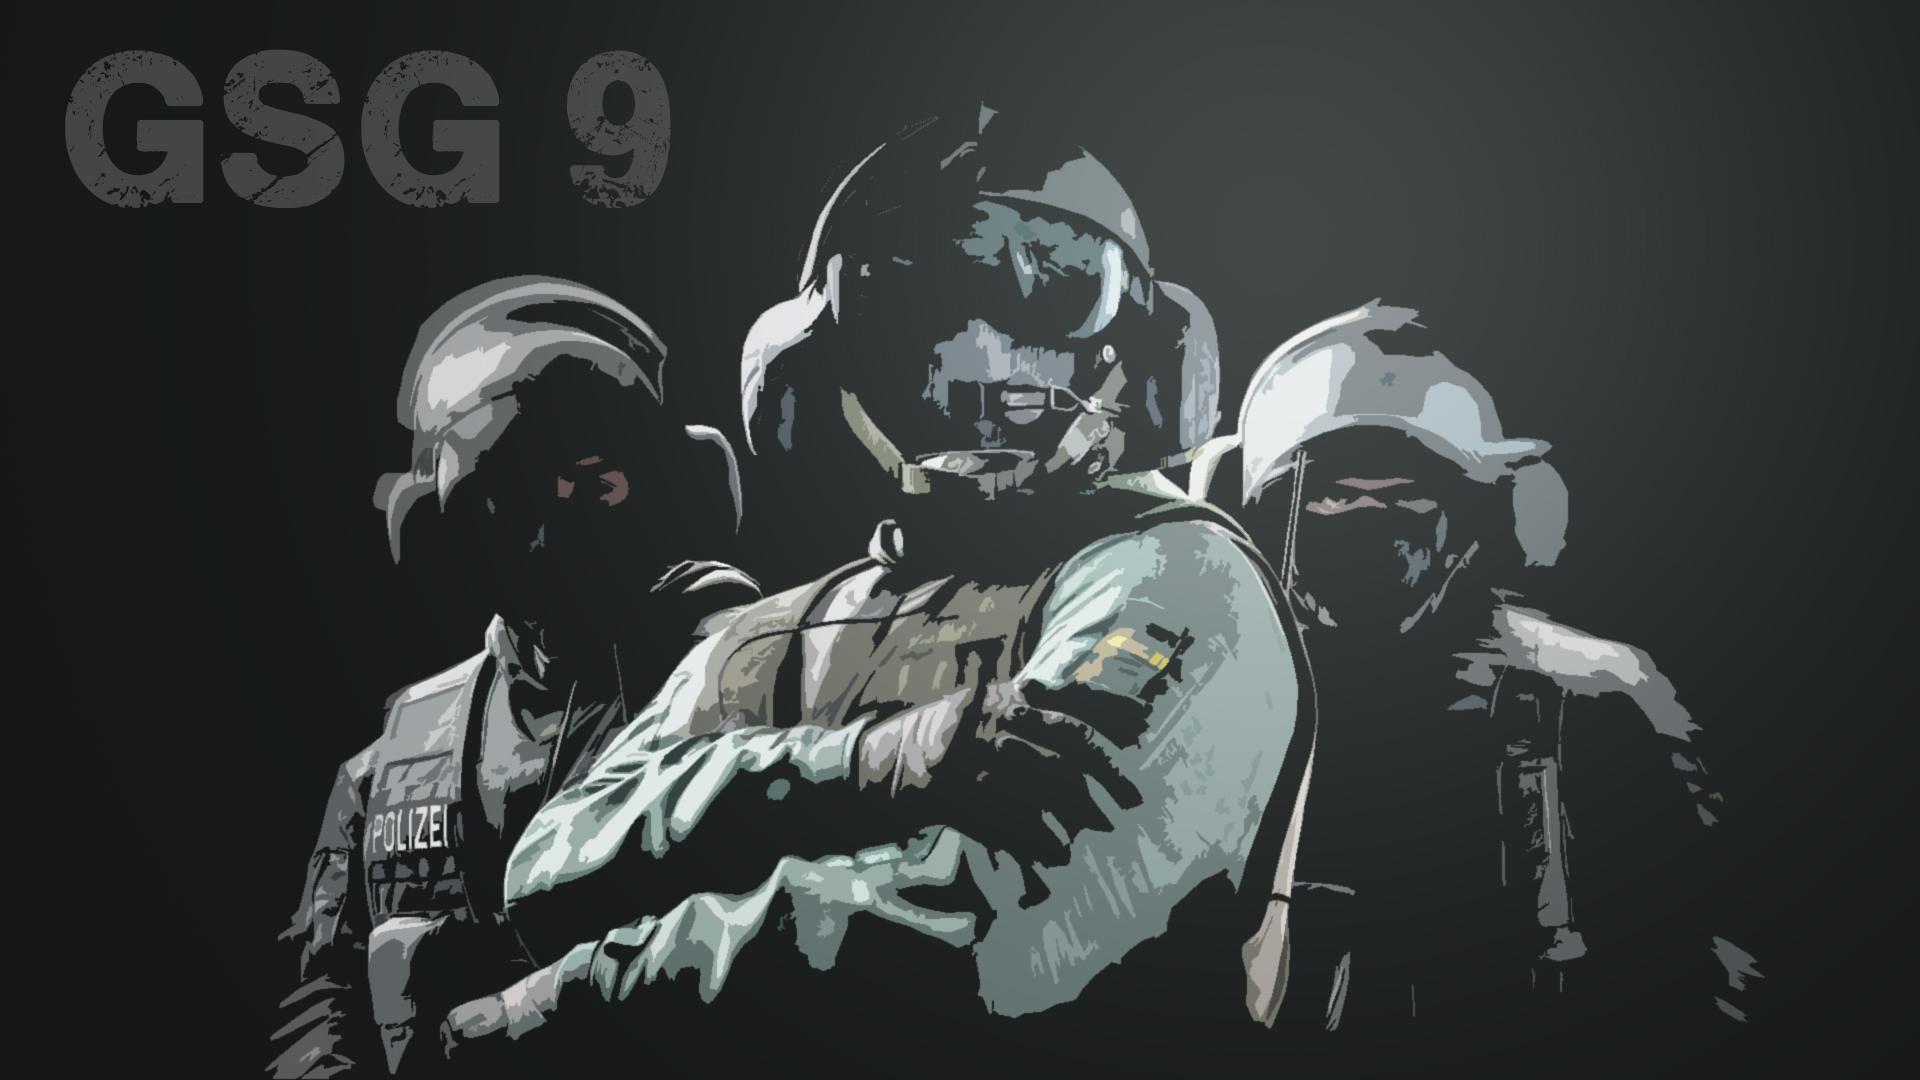 The Gsg Wallpaper As Requested From Some Of You Guys R Rainbow6